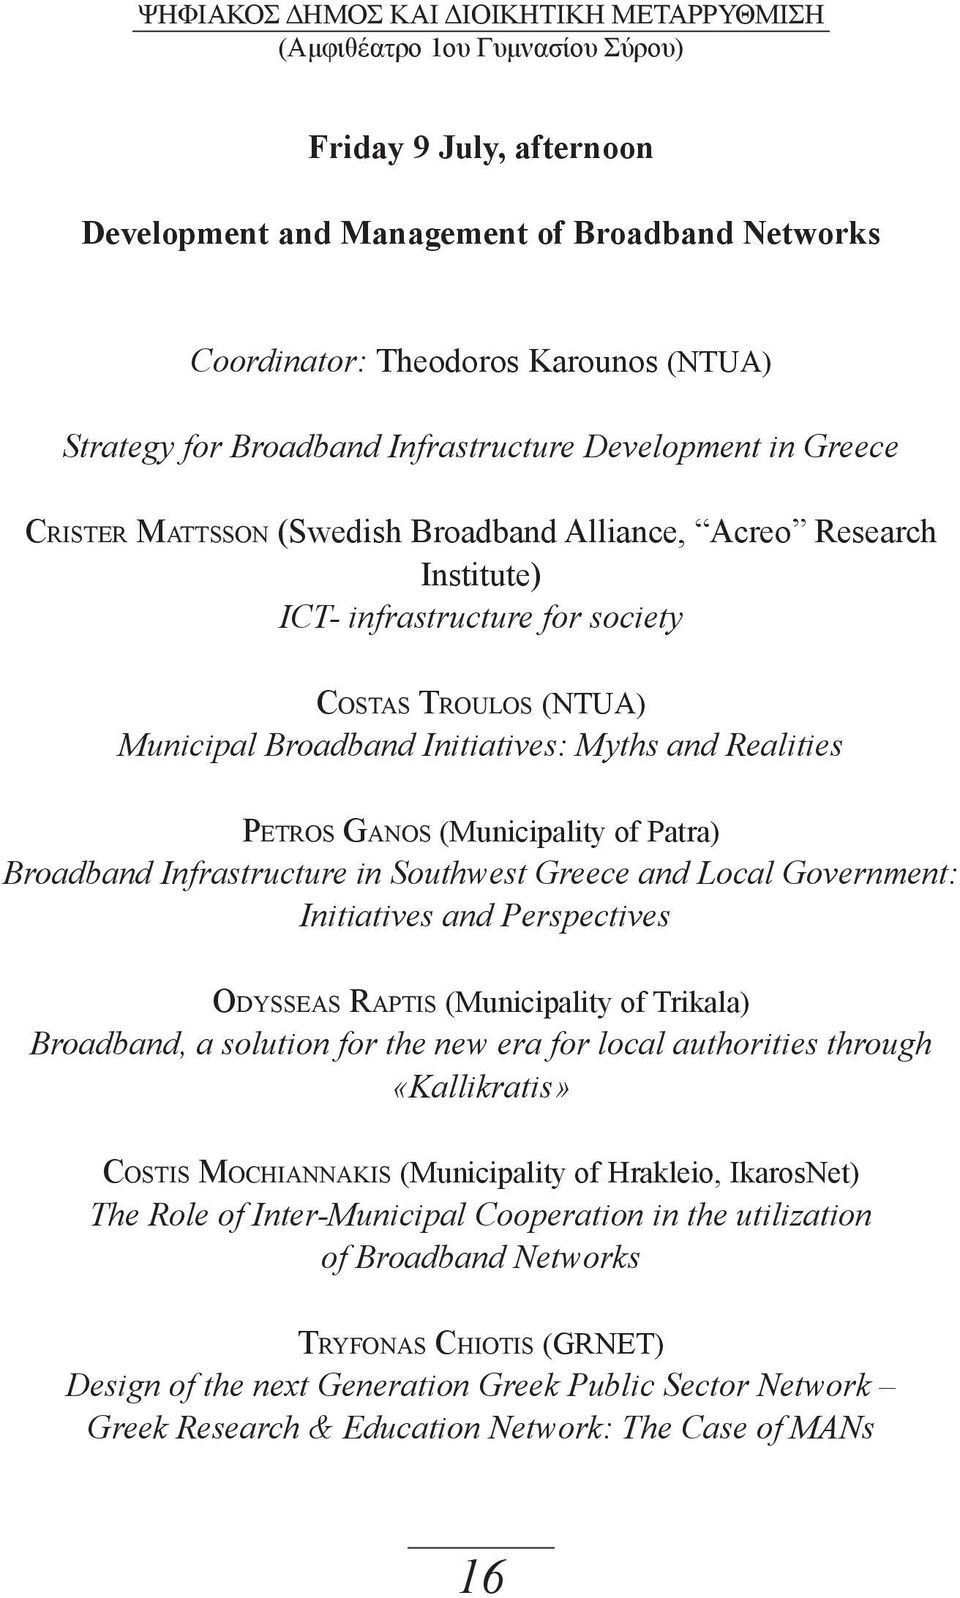 Initiatives: Myths and Realities Petros Ganos (Municipality of Patra) Broadband Infrastructure in Southwest Greece and Local Government: Initiatives and Perspectives Odysseas Raptis (Municipality of